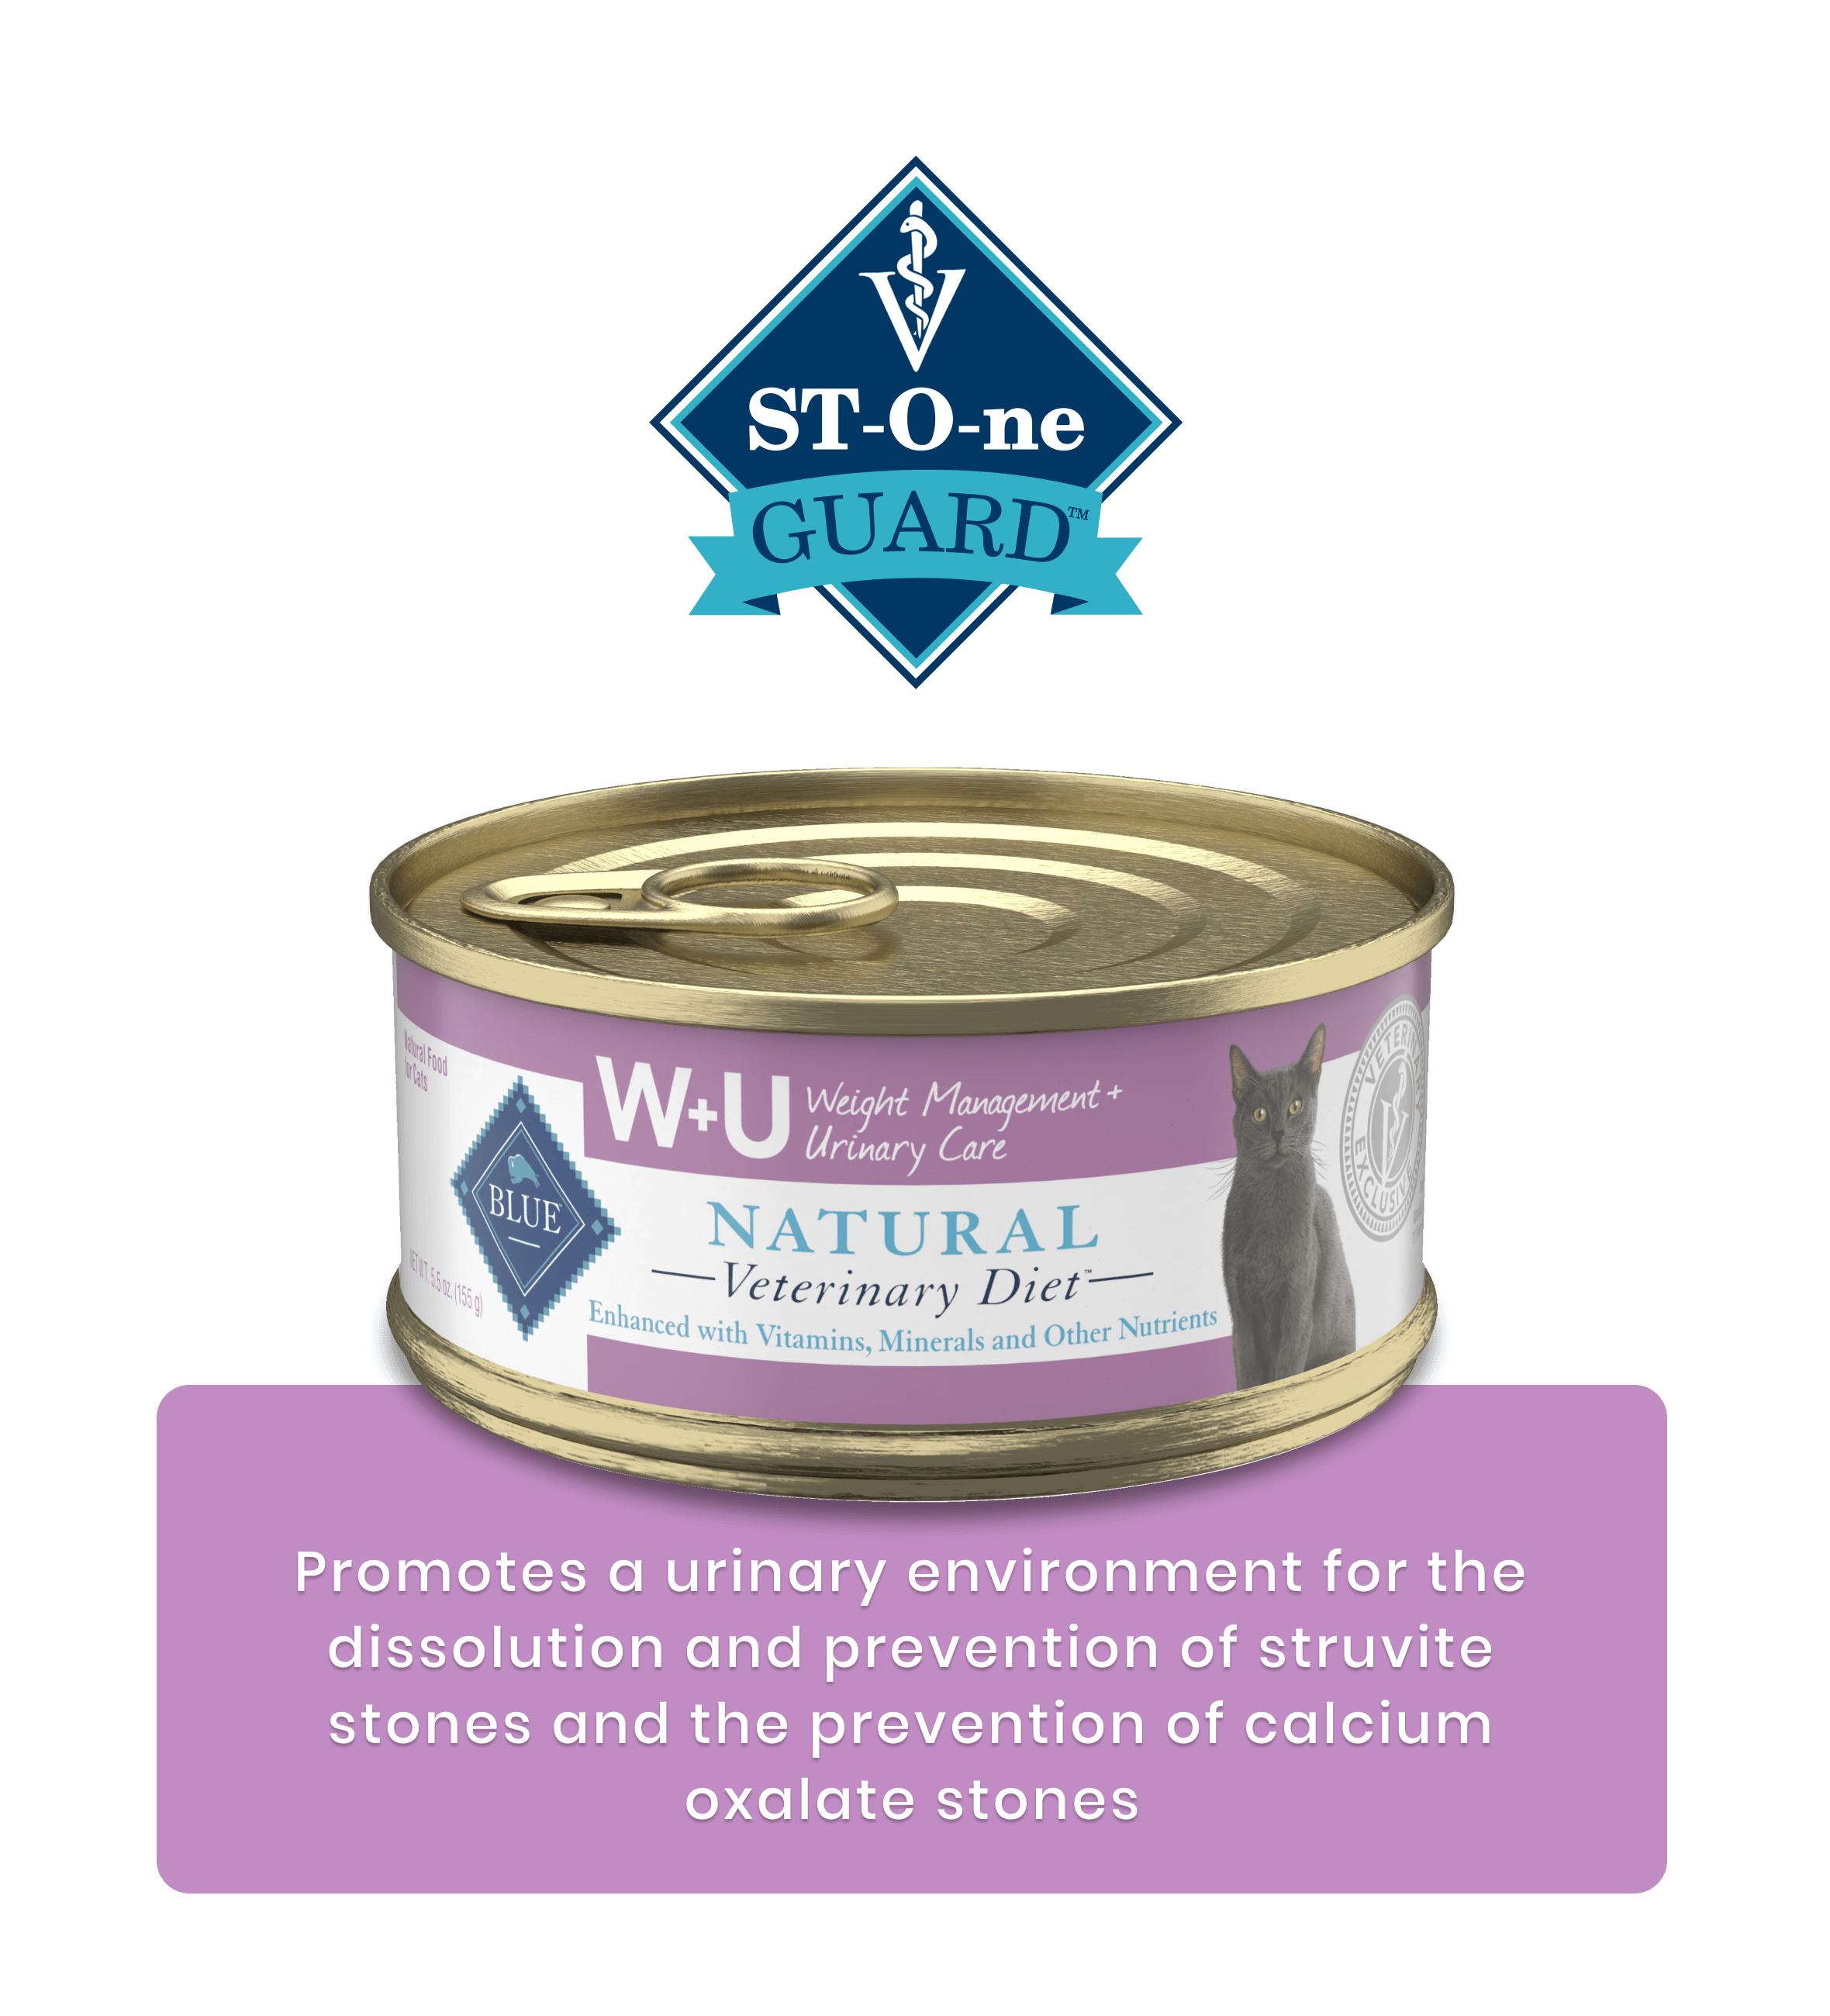 W+U Weight Management + Urinary Care St-O-ne Guard  Promotes a urinary environment for the dissolution and prevention of struvite stones and the prevention of calcium oxalate stones